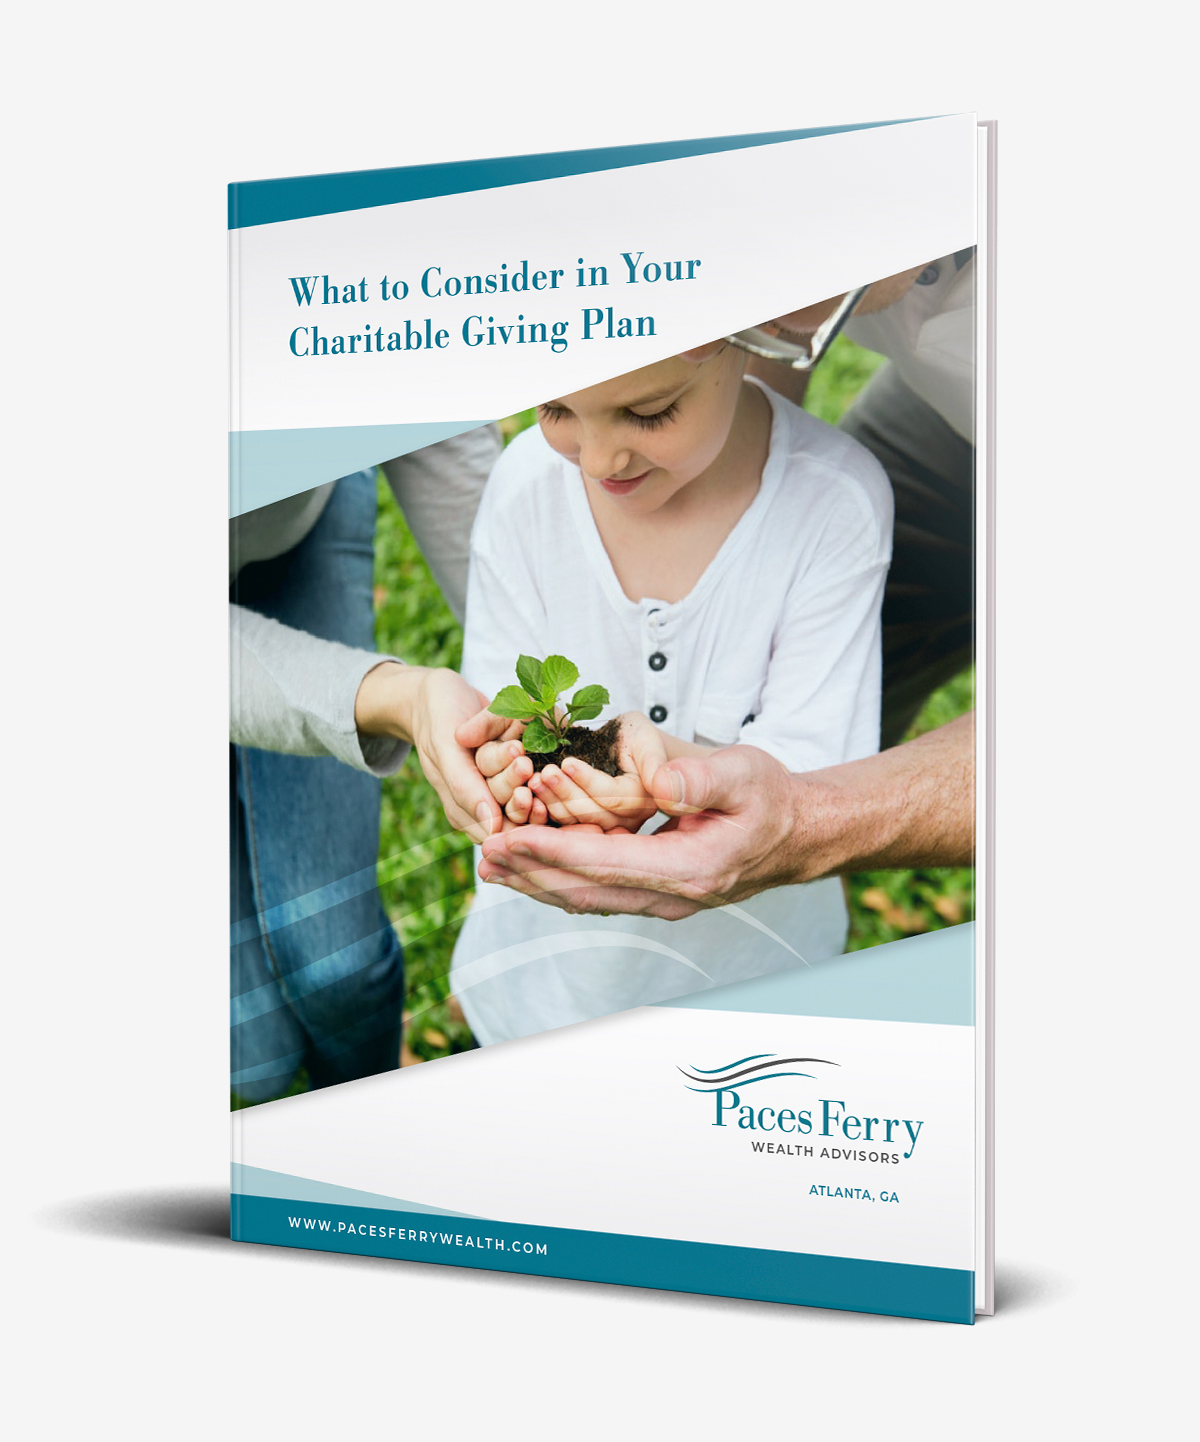 WHAT TO CONSIDER IN YOUR CHARITABLE GIVING PLAN